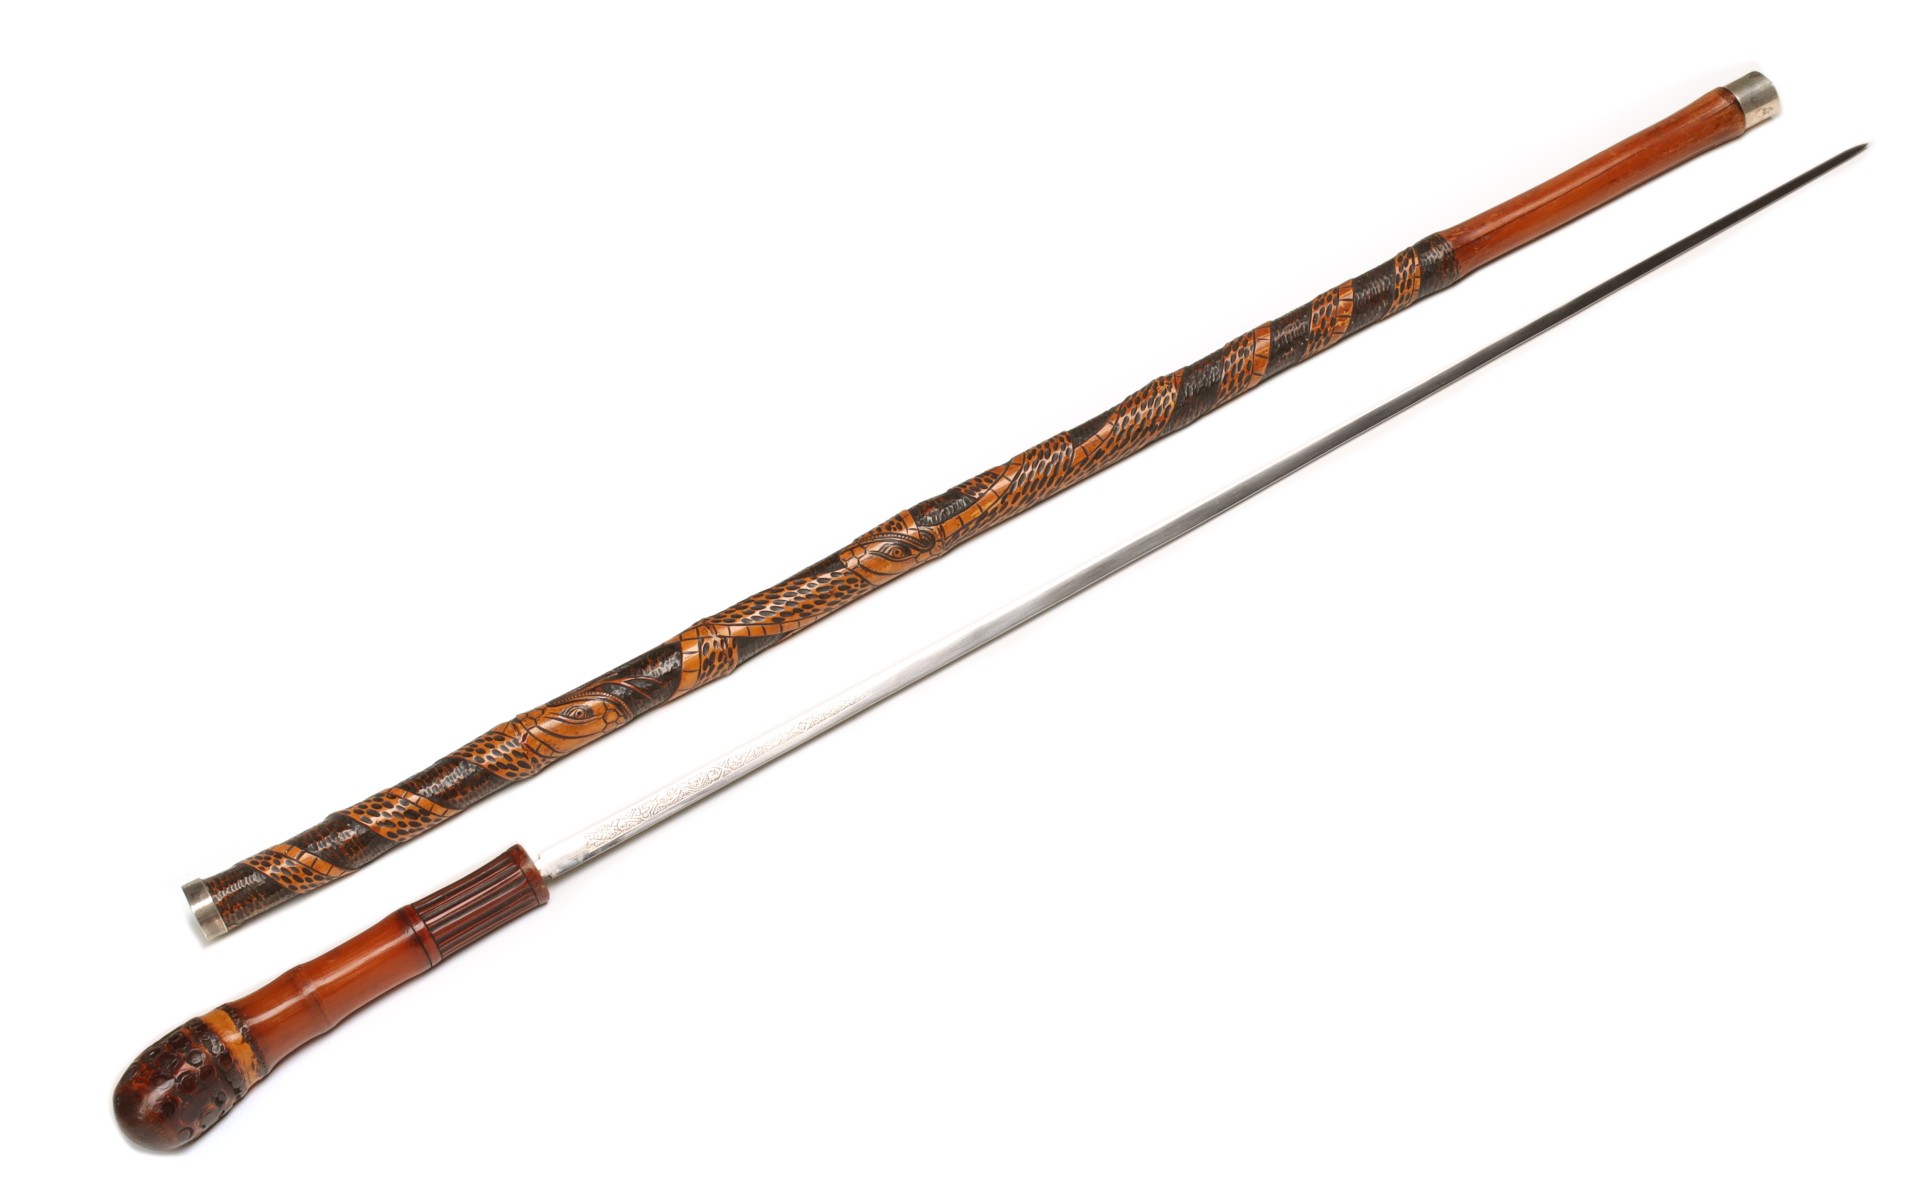 A DECORATED BAMBOO WALKING STICK WITH BLADE C. 1908